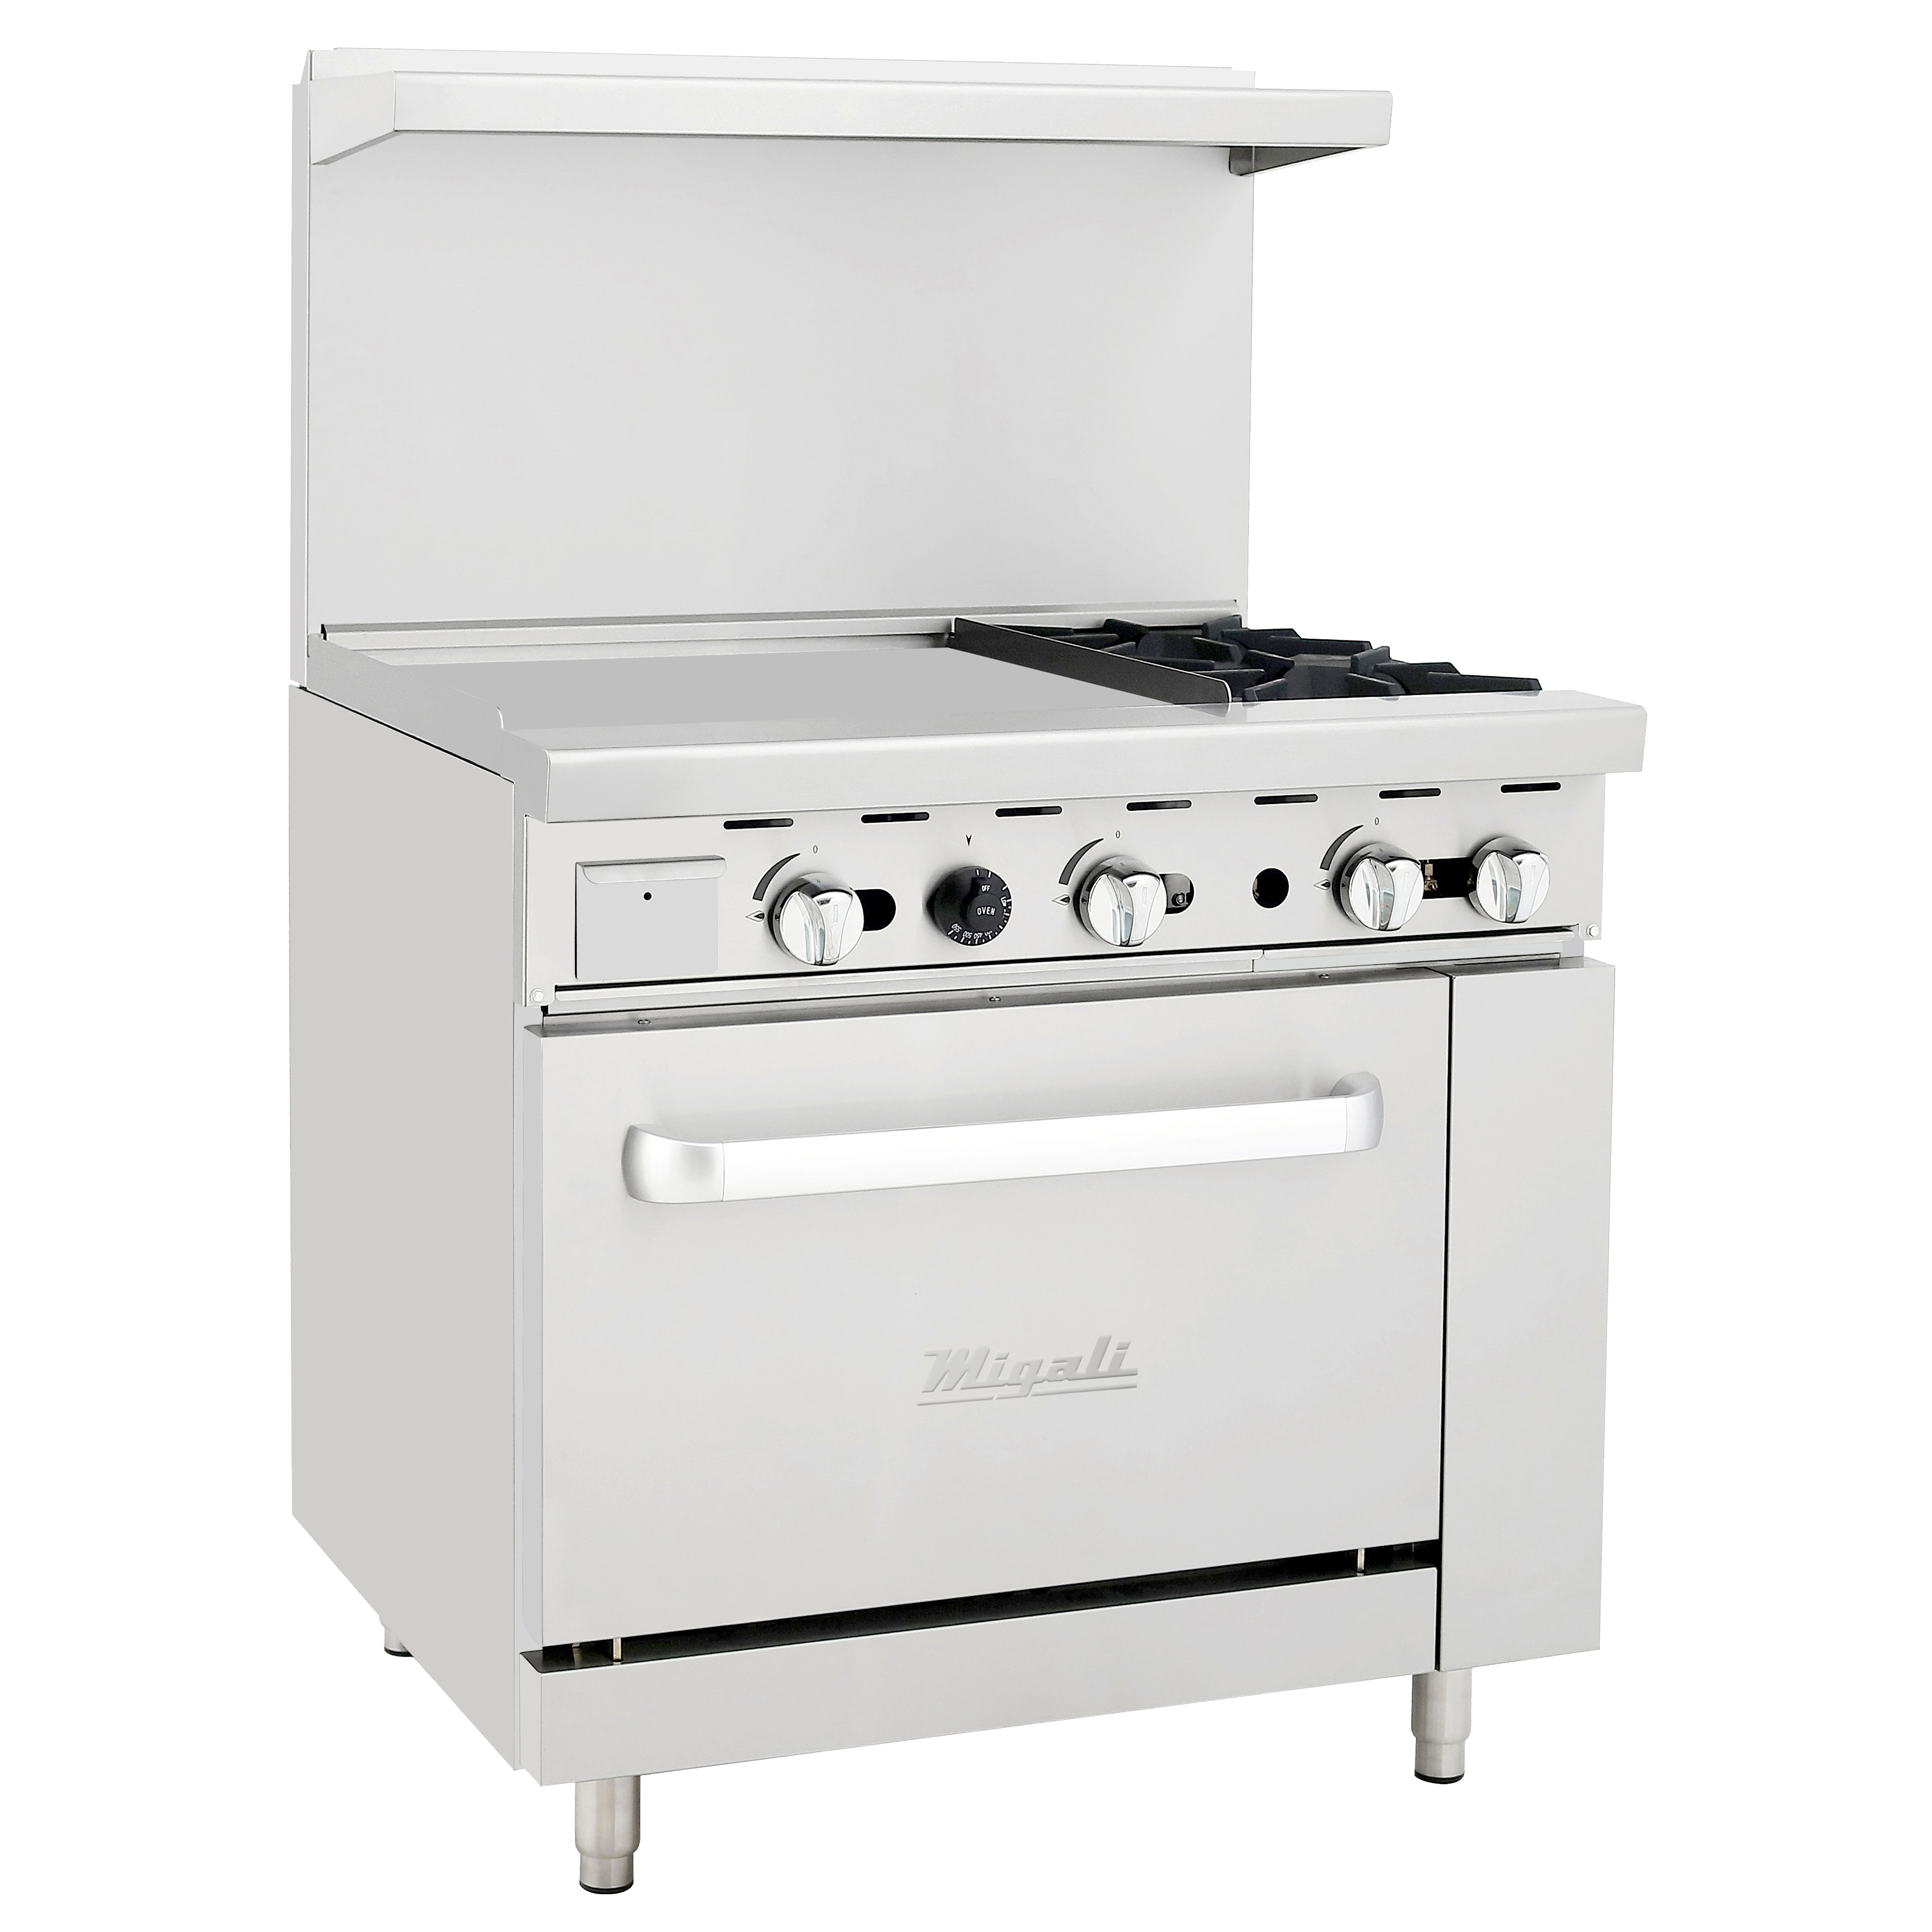 superior-equipment-supply - Migali - Migali 36" Stainless Steel Two Burner Natural Gas Range with 24" Griddle